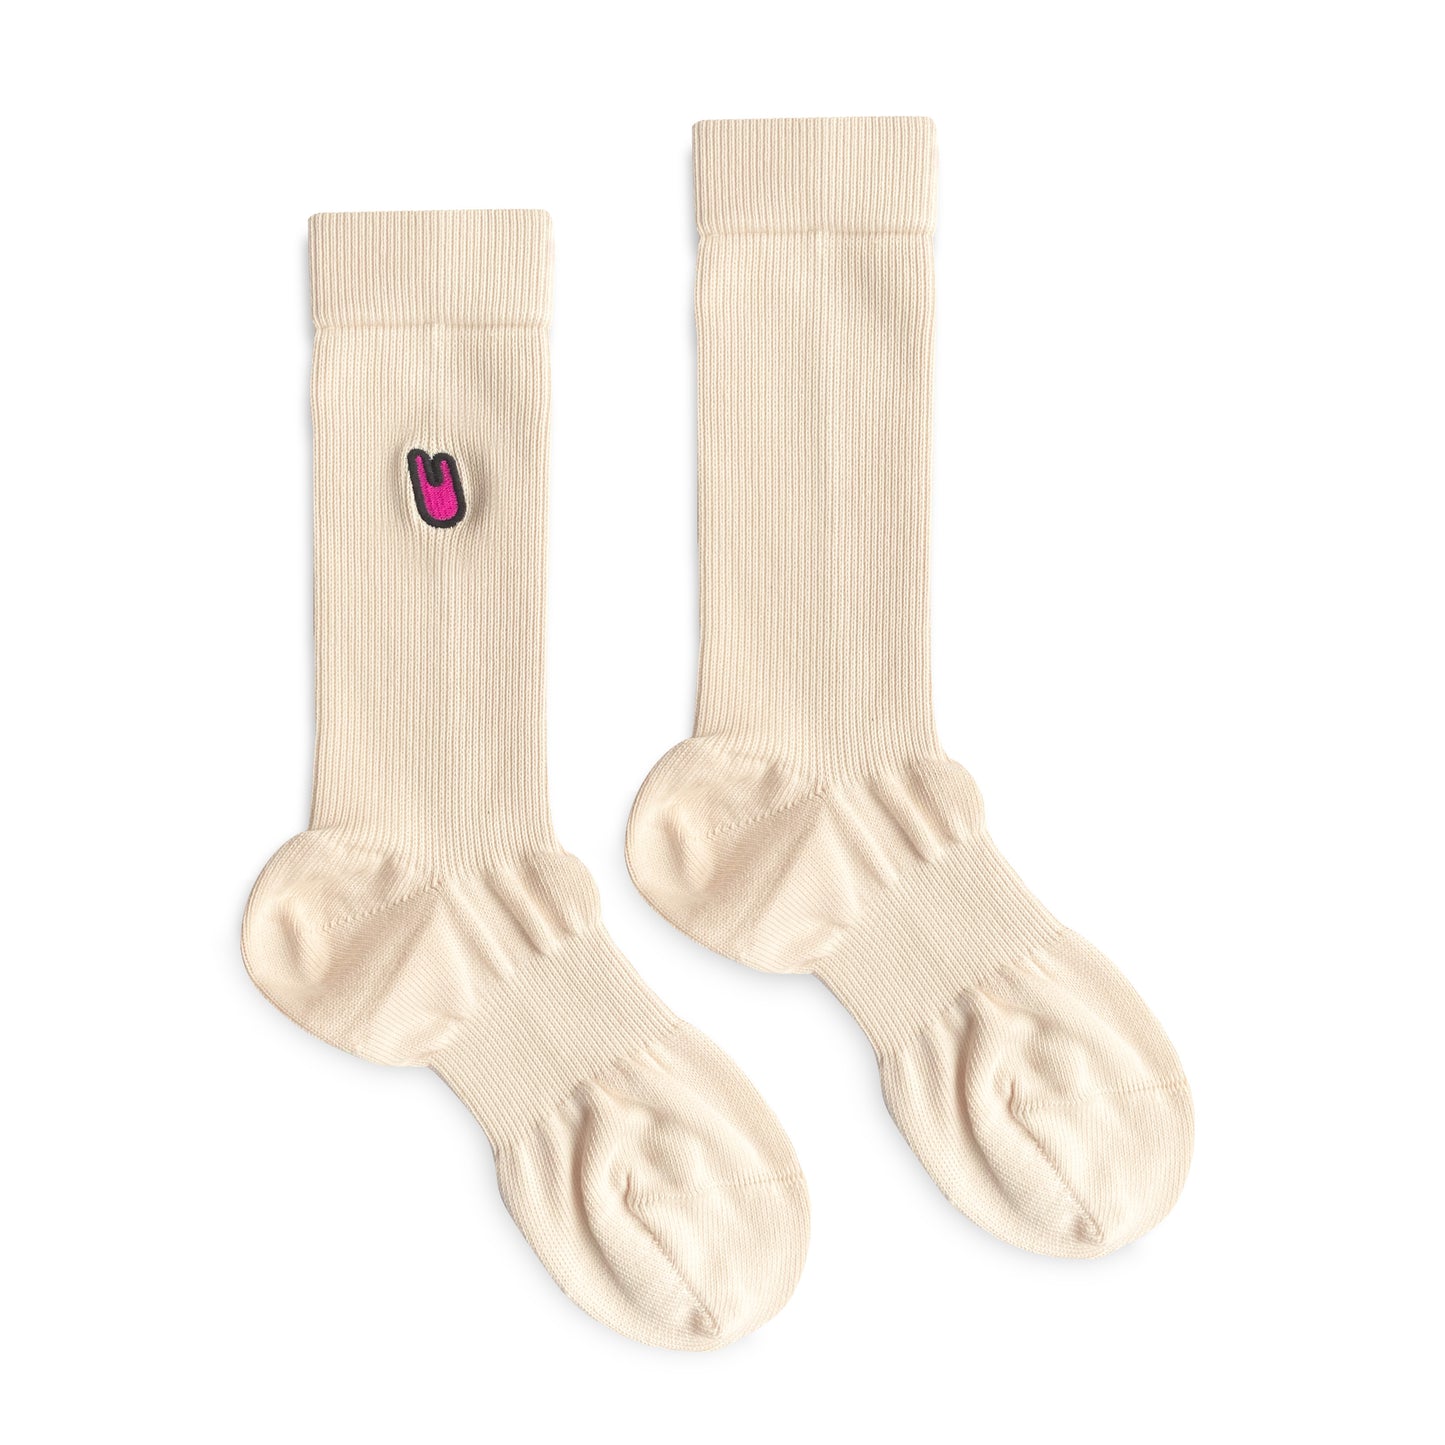 The Zilch Sock 3-Pack